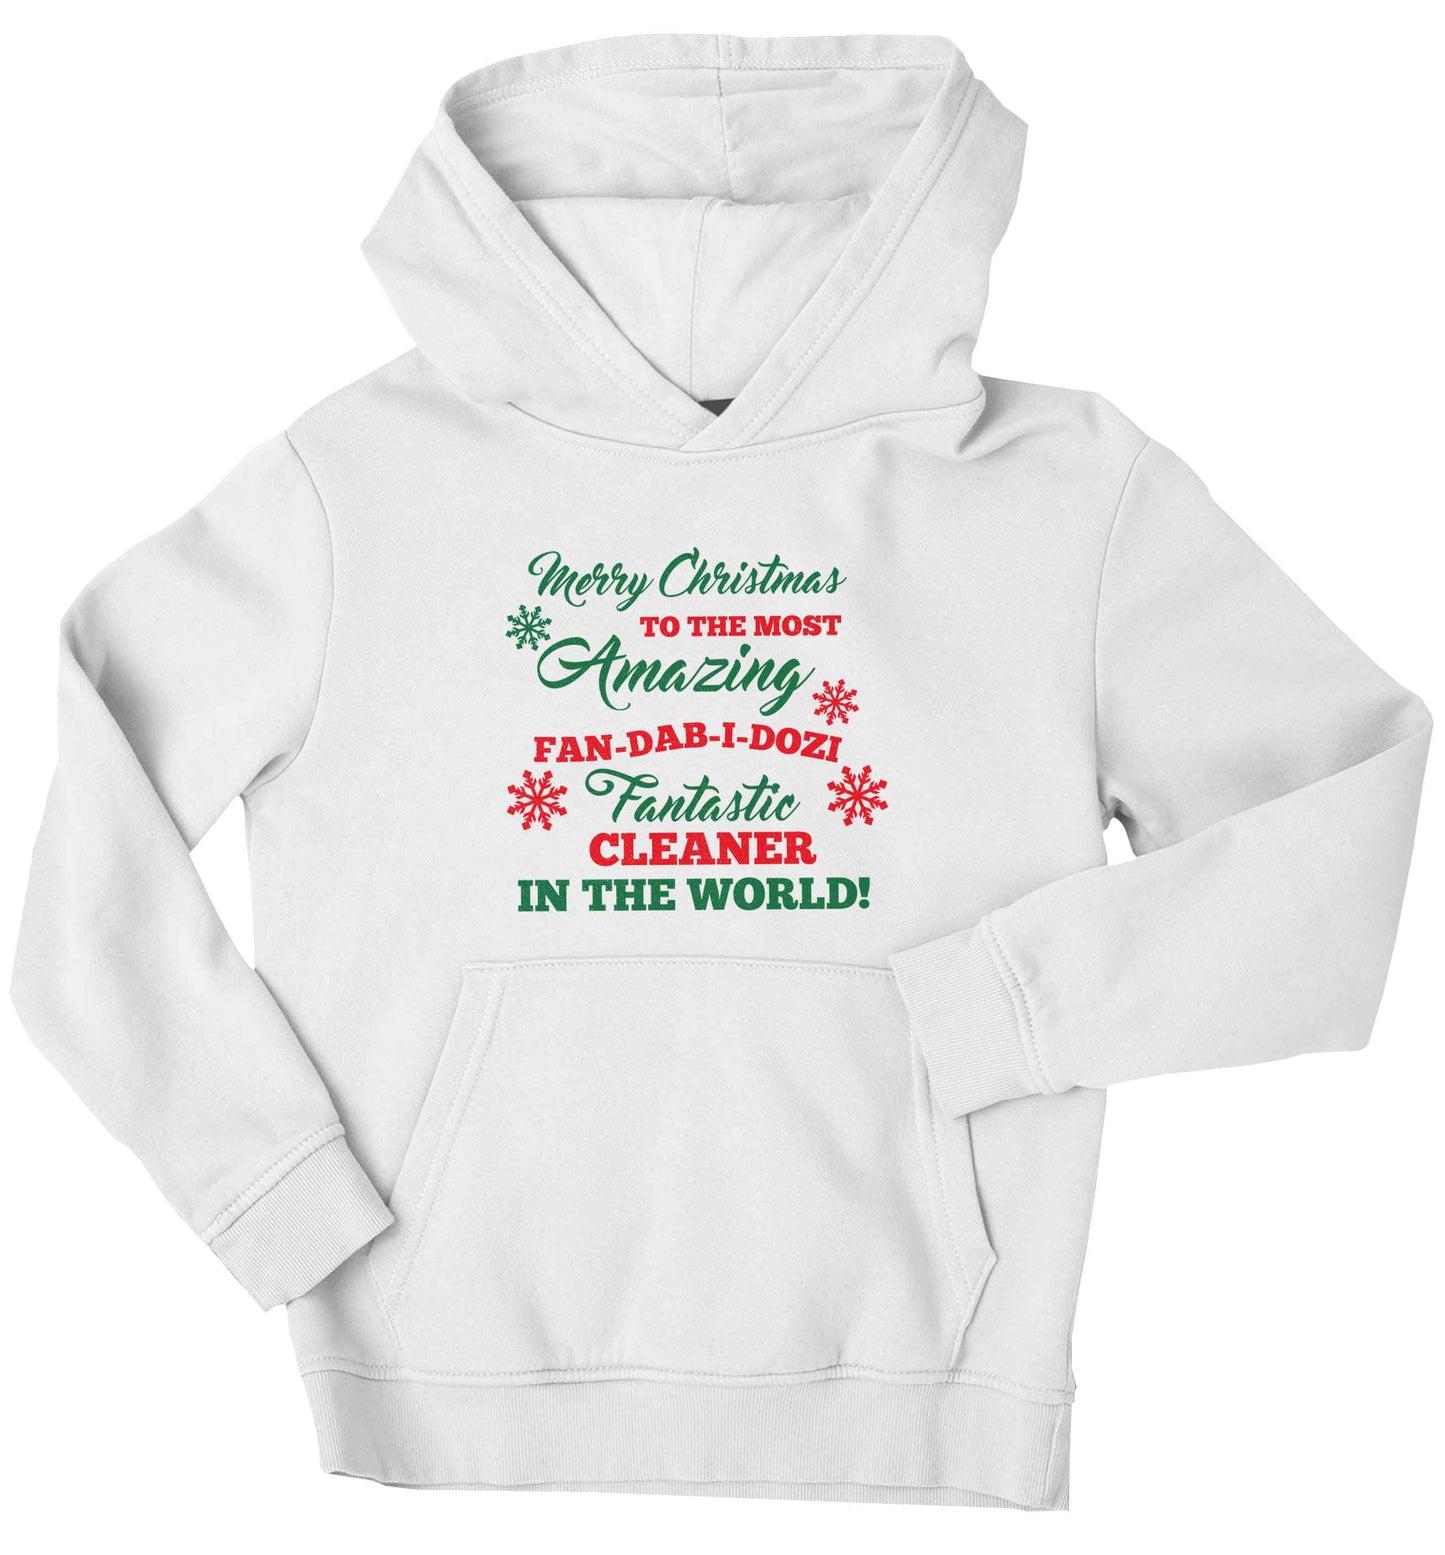 Merry Christmas to the most amazing fan-dab-i-dozi fantasic cleaner in the world children's white hoodie 12-13 Years